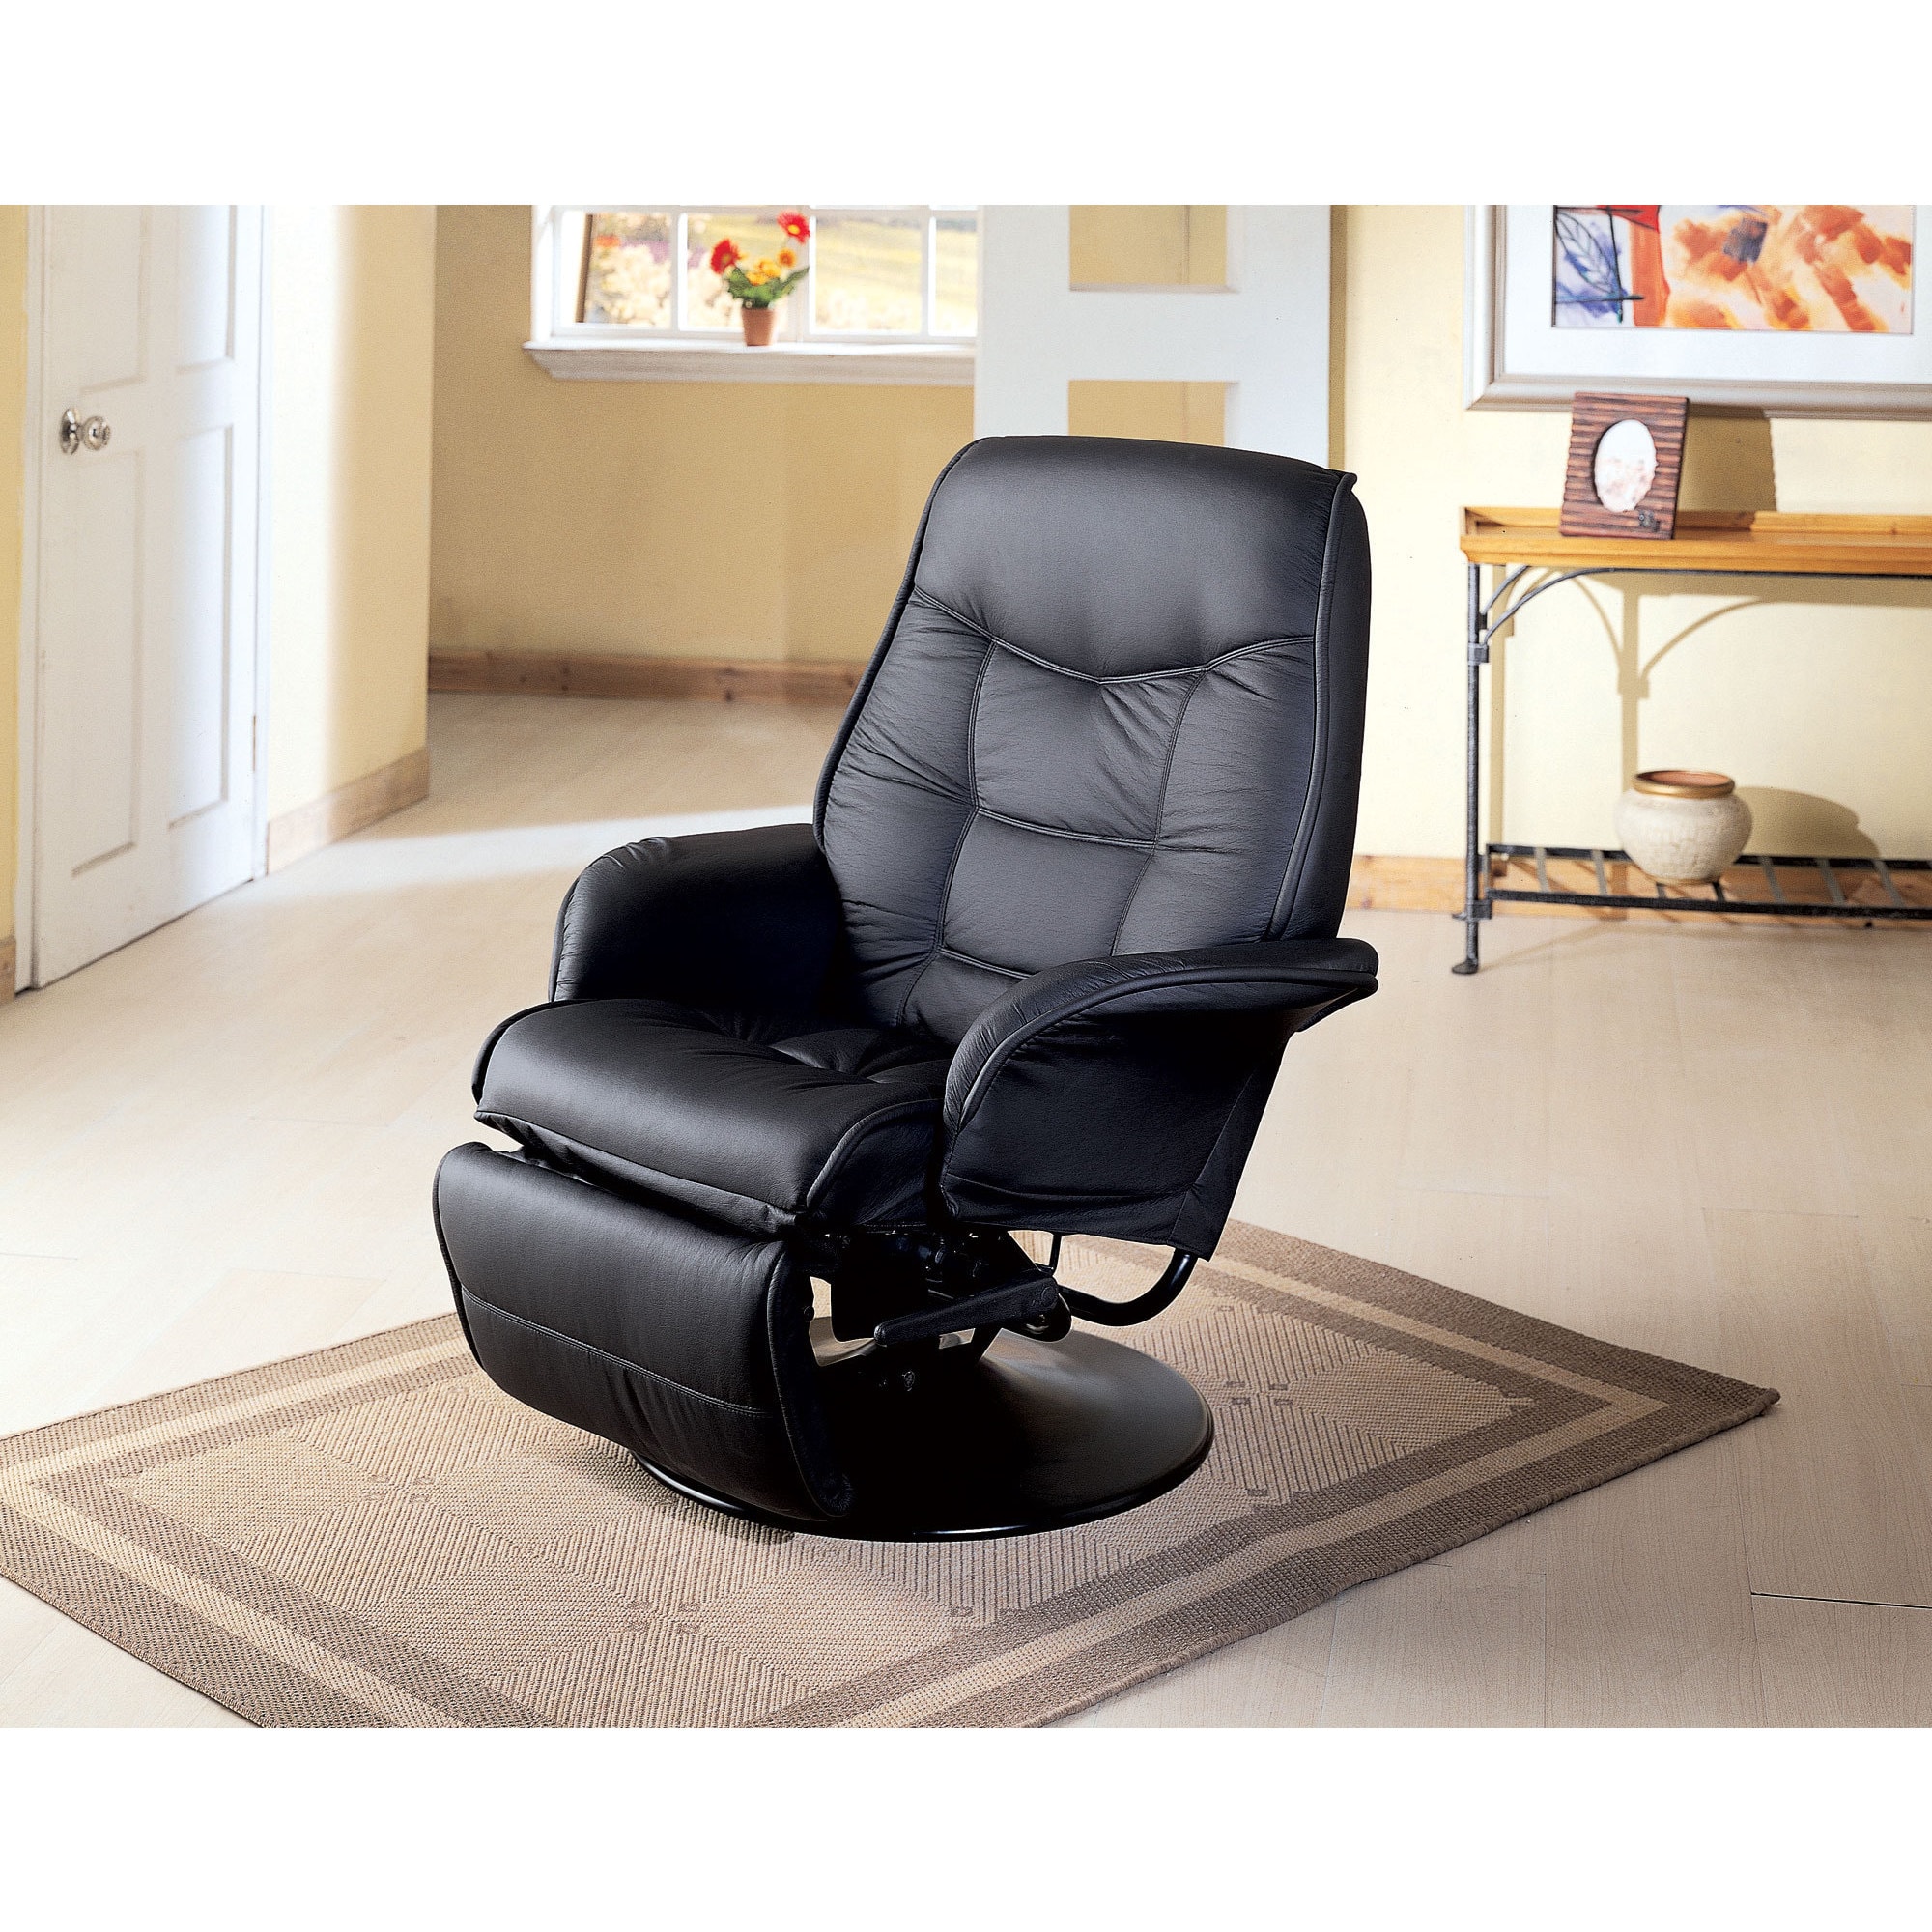 Add On Swivel Platform For Recliner Chairs | Recliner Chair